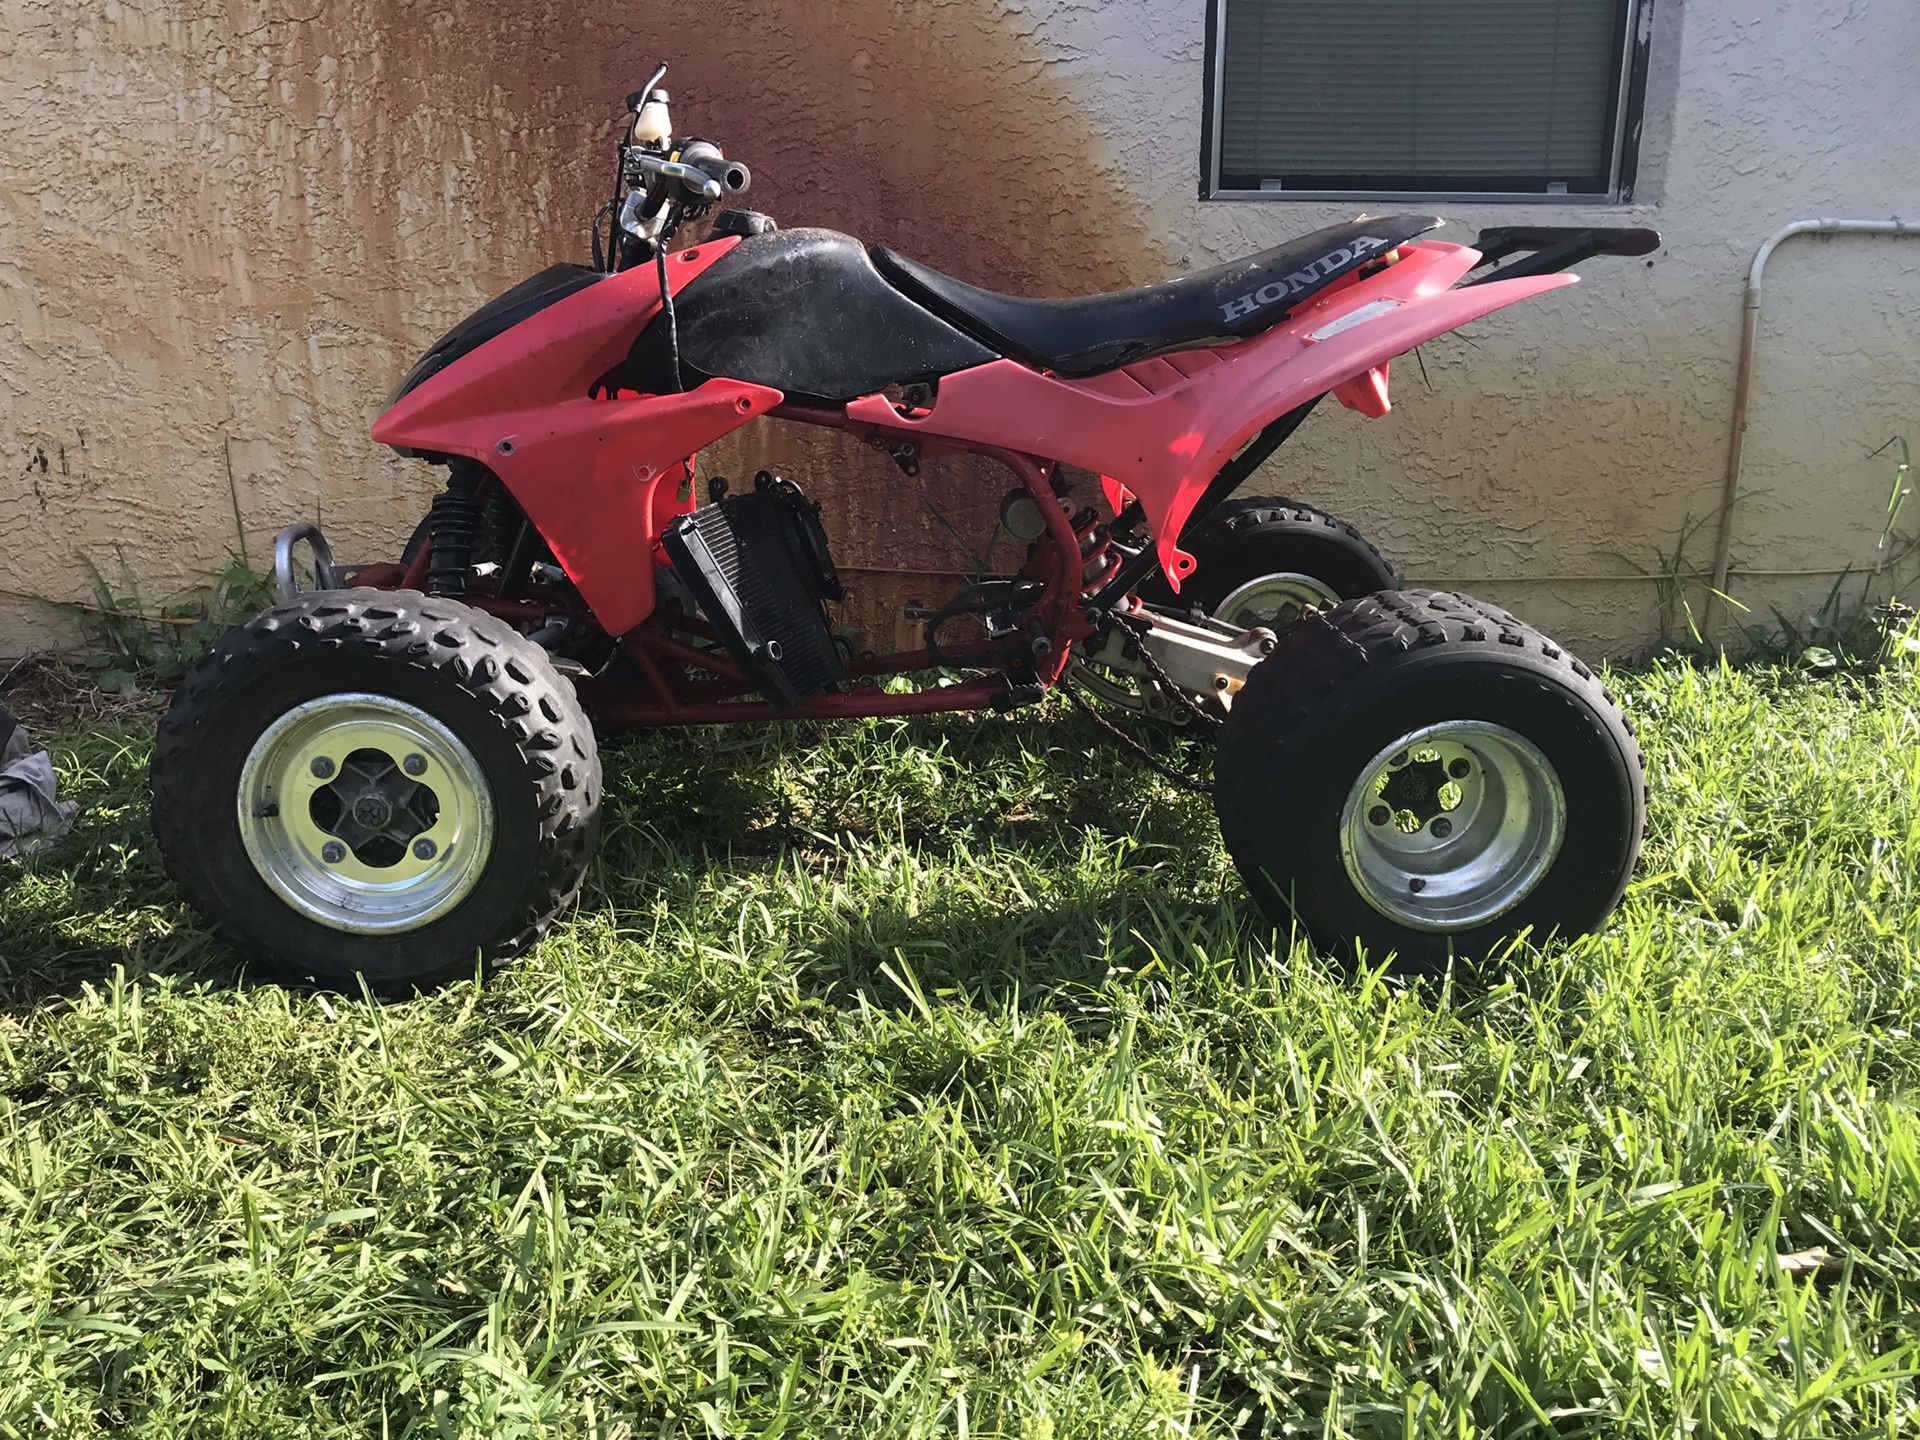 Need gone ASAP Clean title 2004 TRX 450R frame